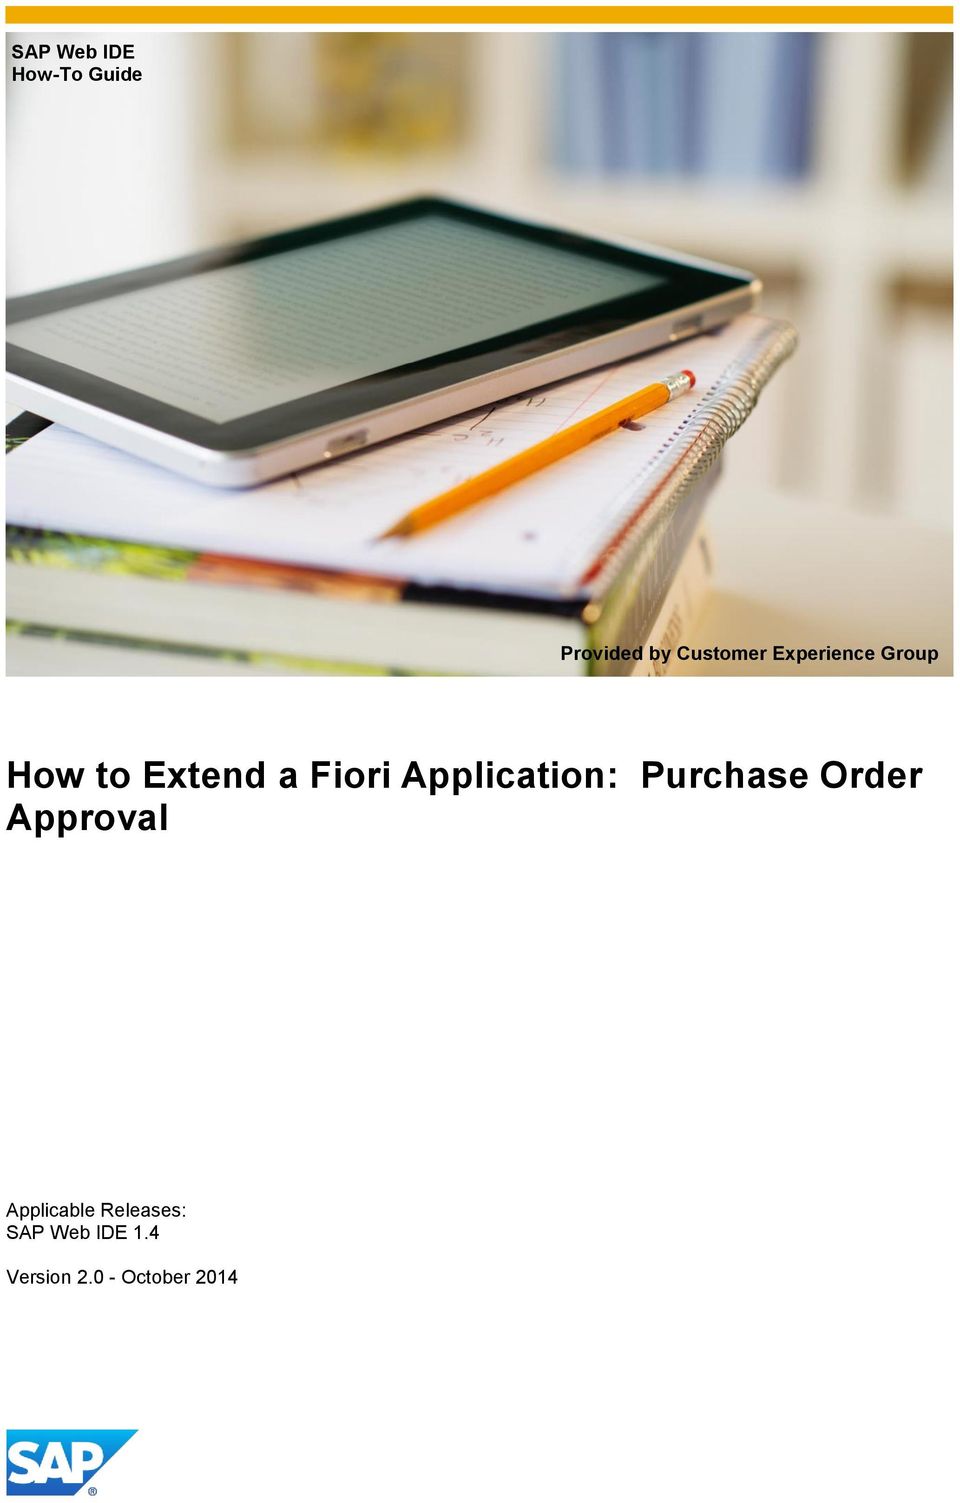 Application: Purchase Order Approval